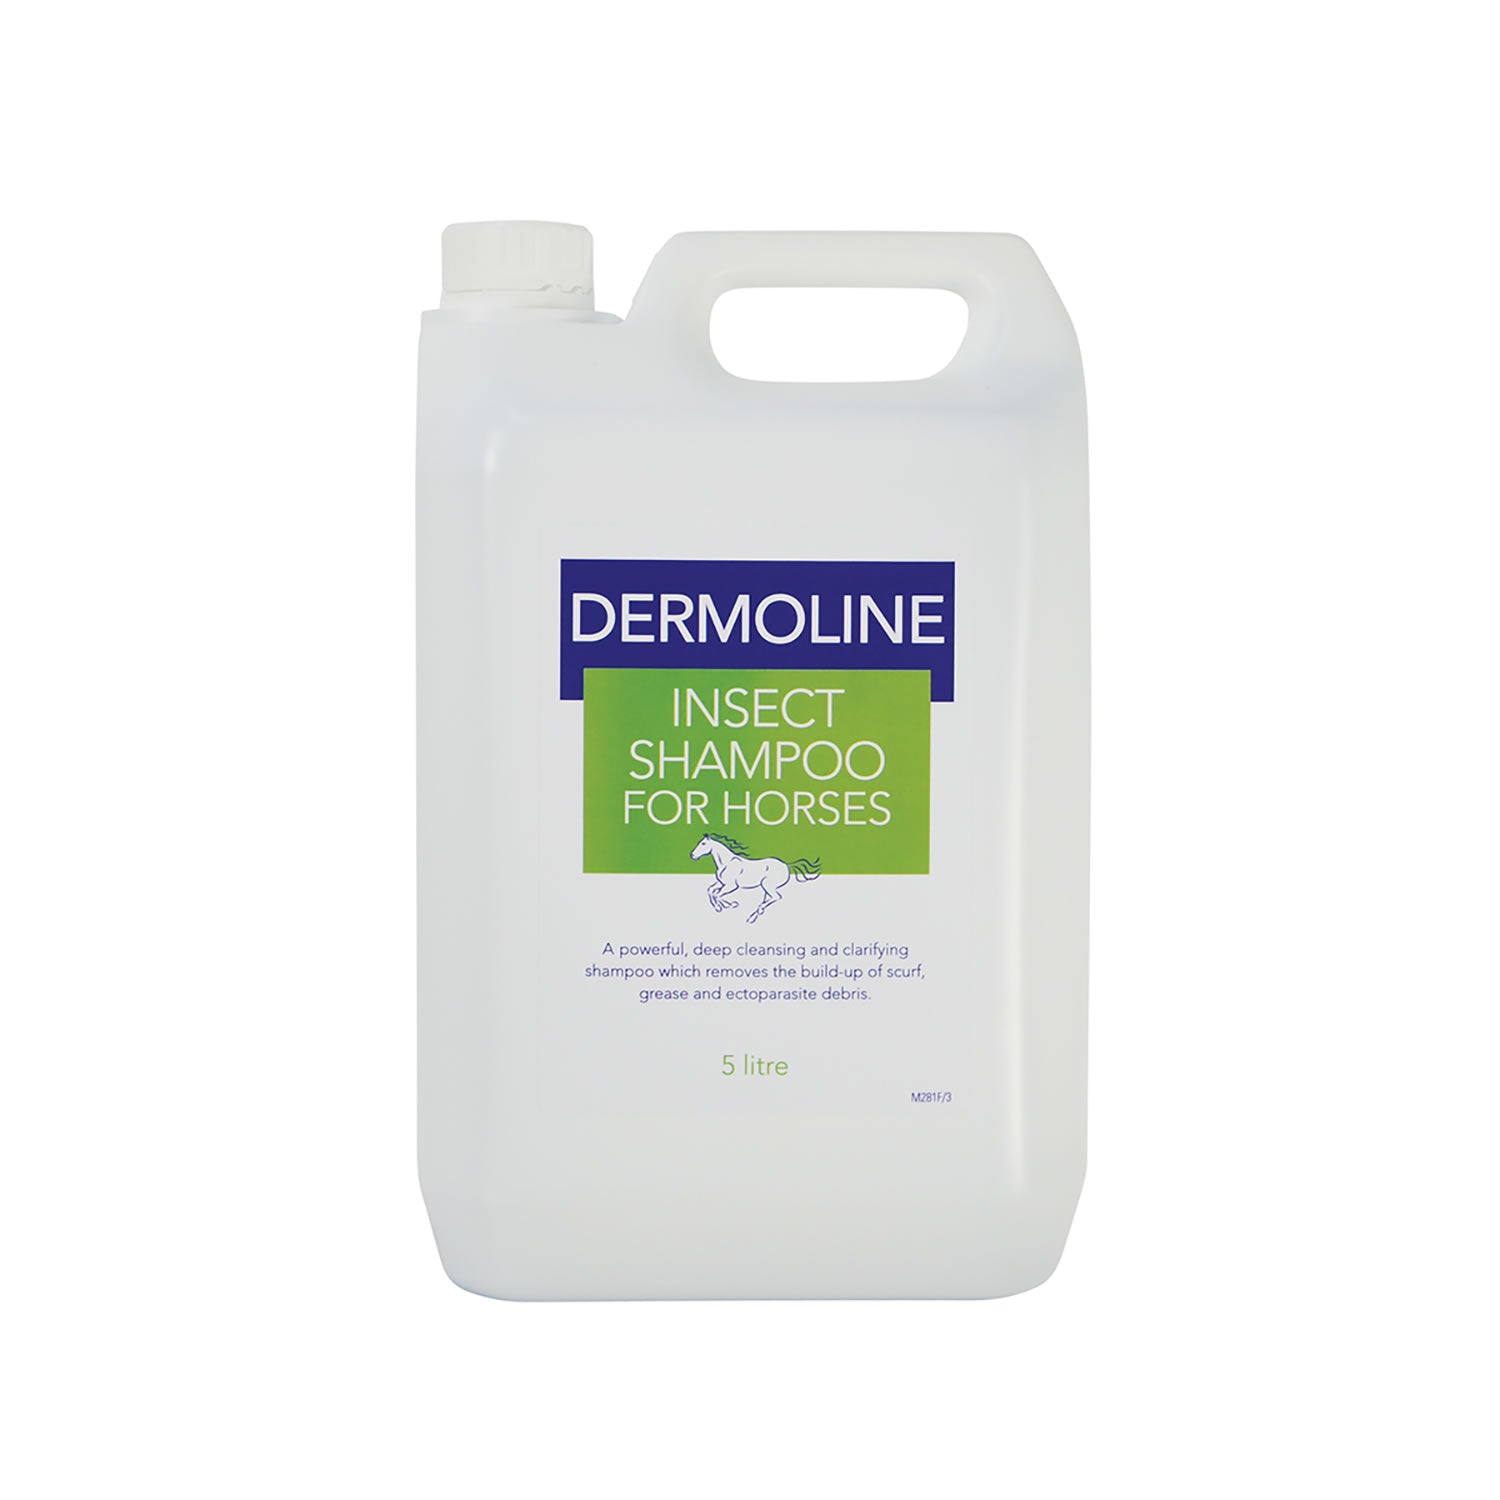 Dermoline Insect Shampoo For Horses 5L